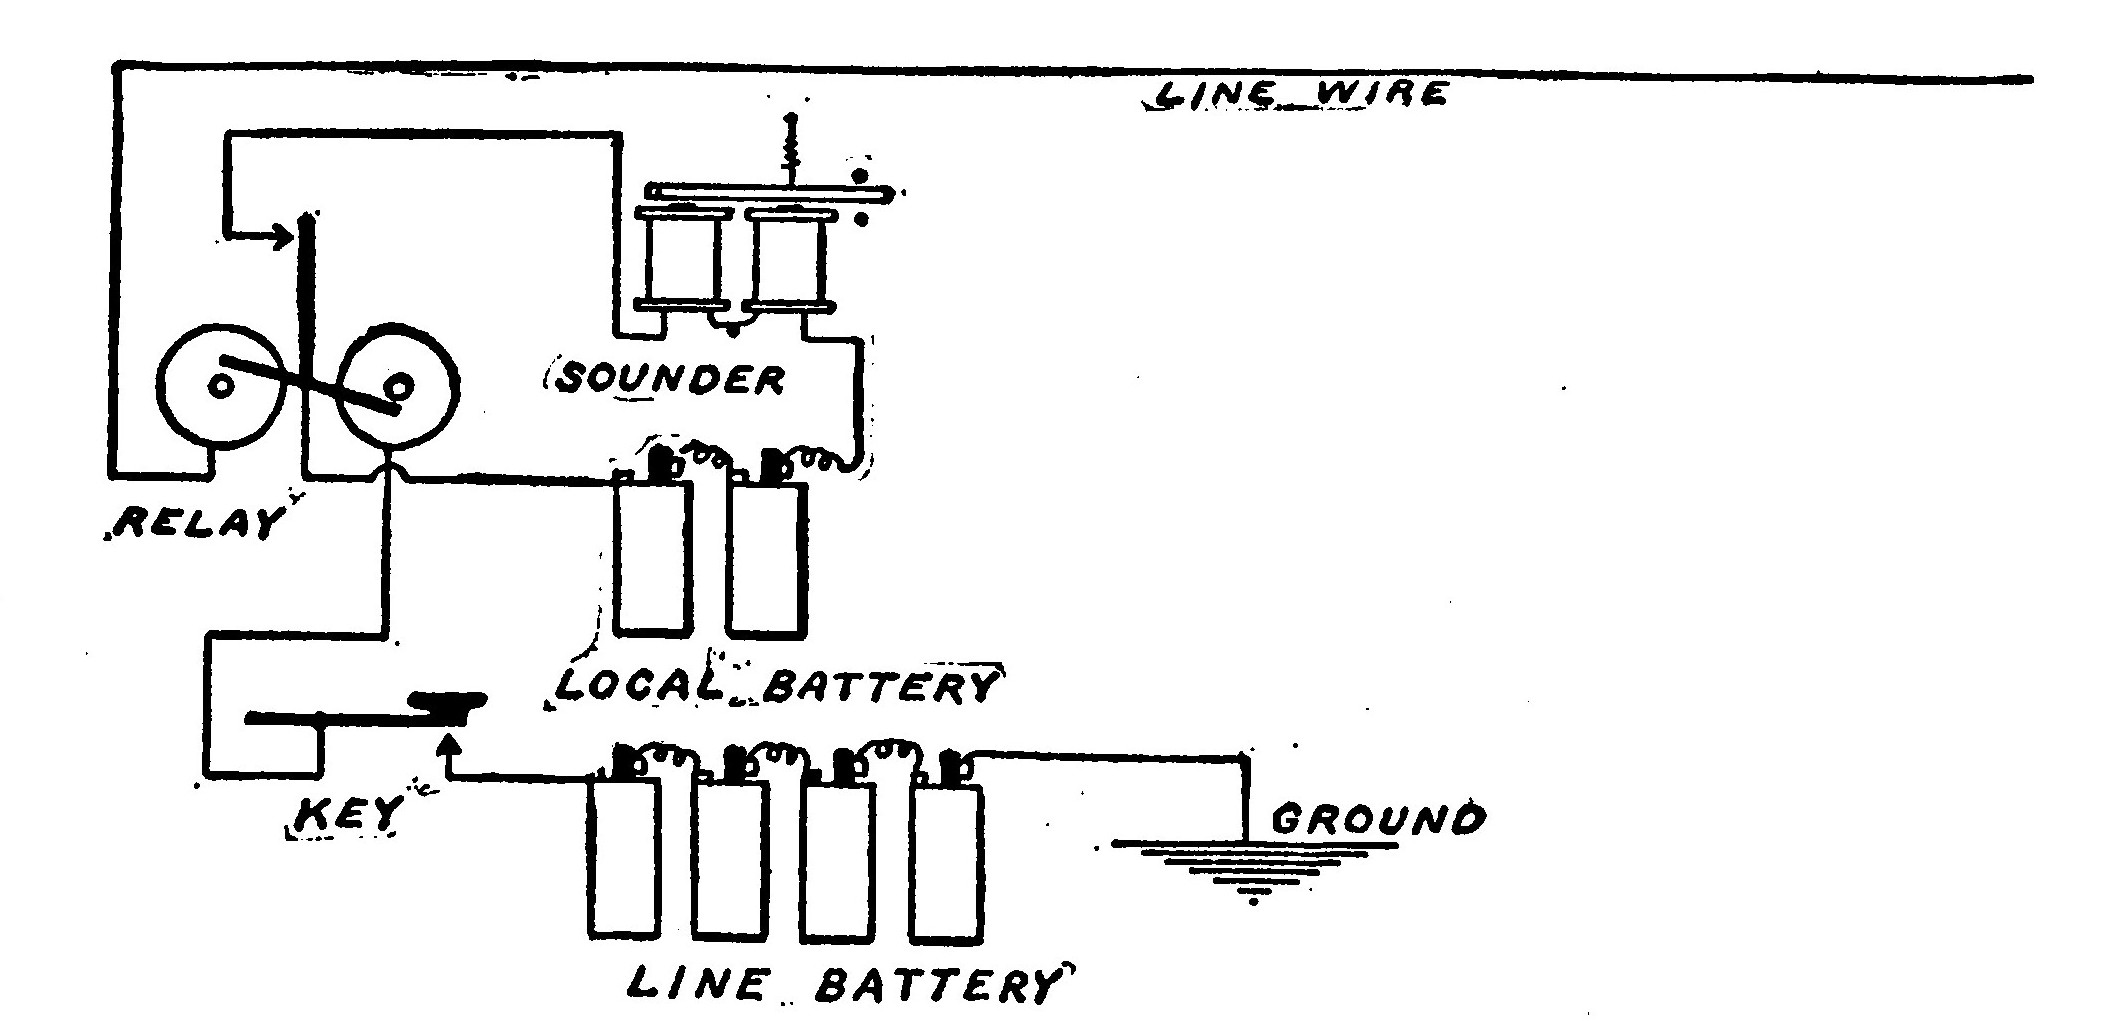 Fig. 140.—A Diagram showing how to connect a Relay, Sounder, and Key.